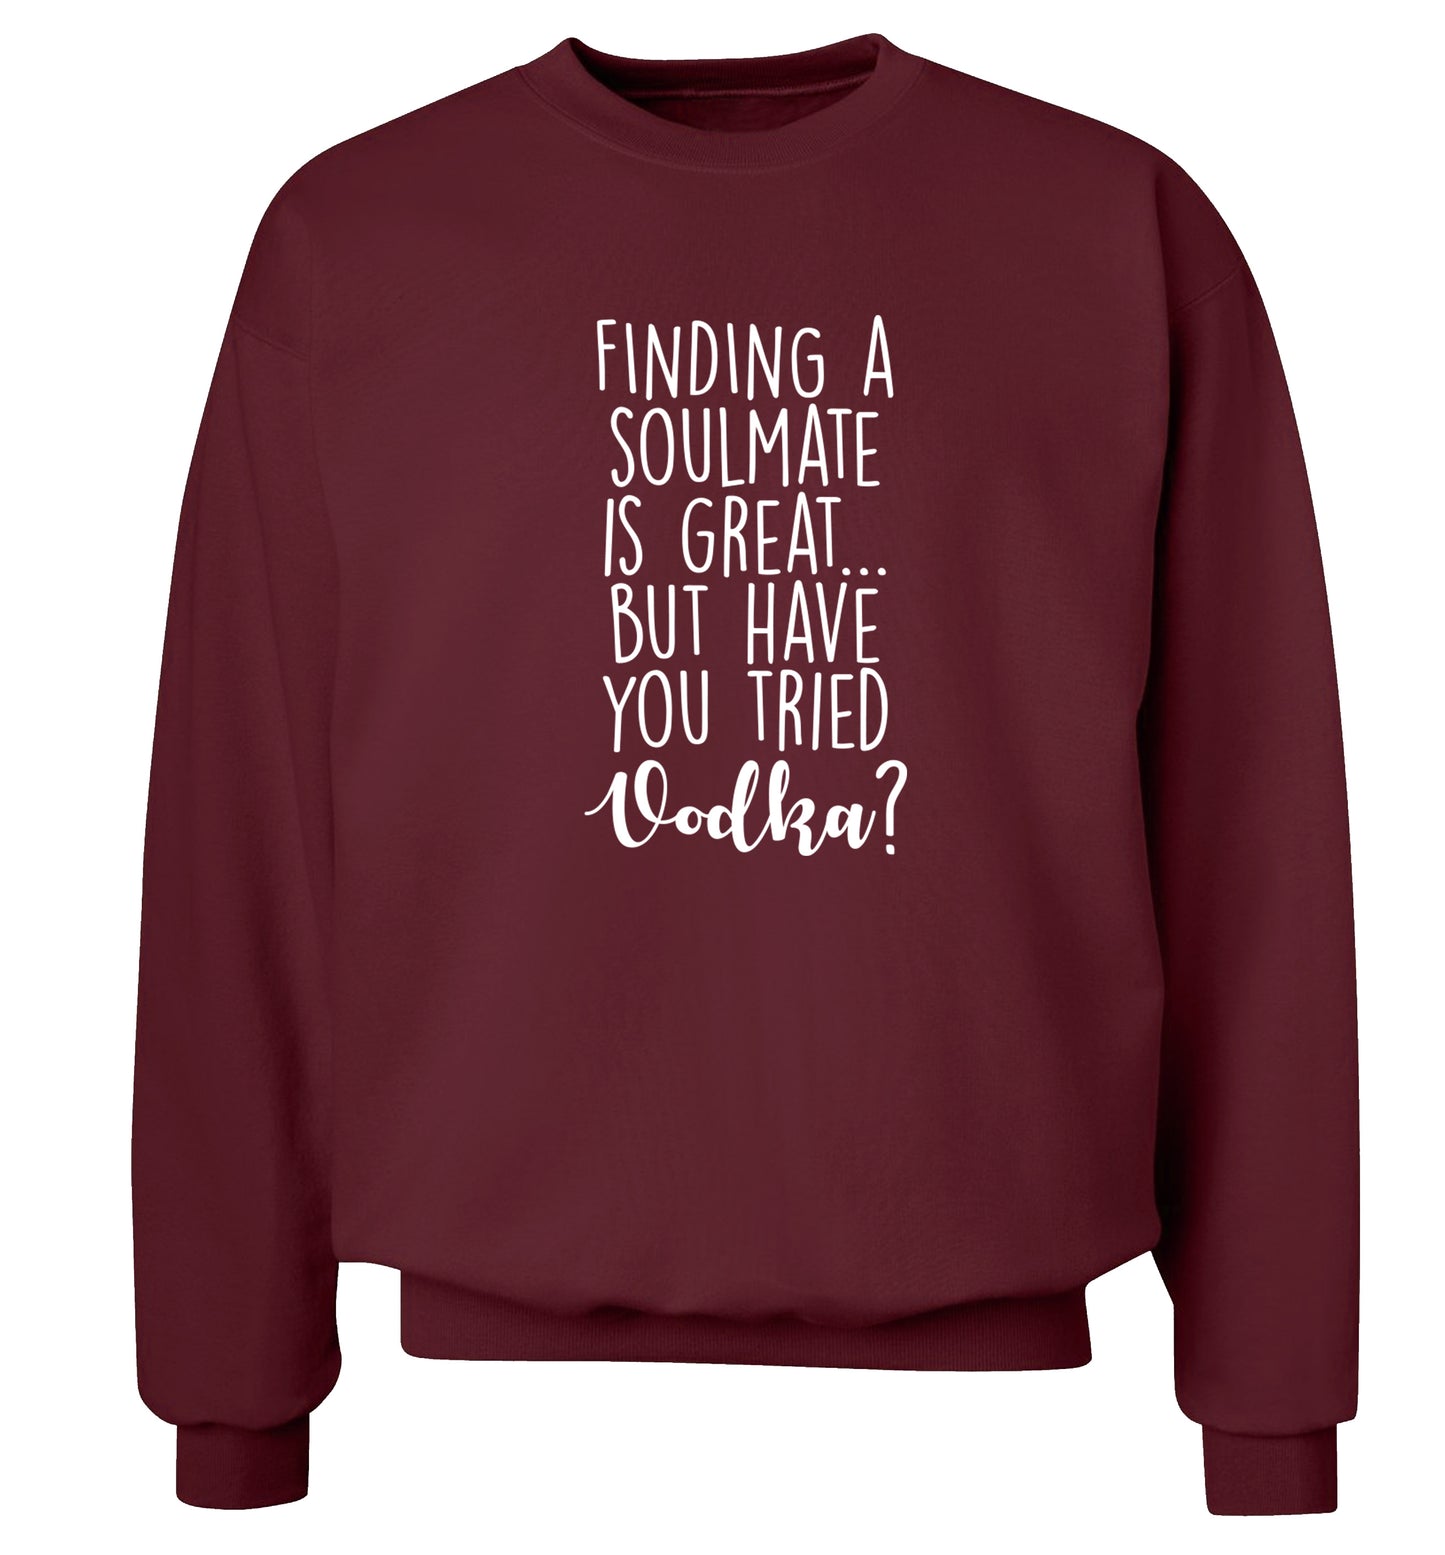 Finding a soulmate is great but have you tried vodka? Adult's unisex maroon Sweater 2XL